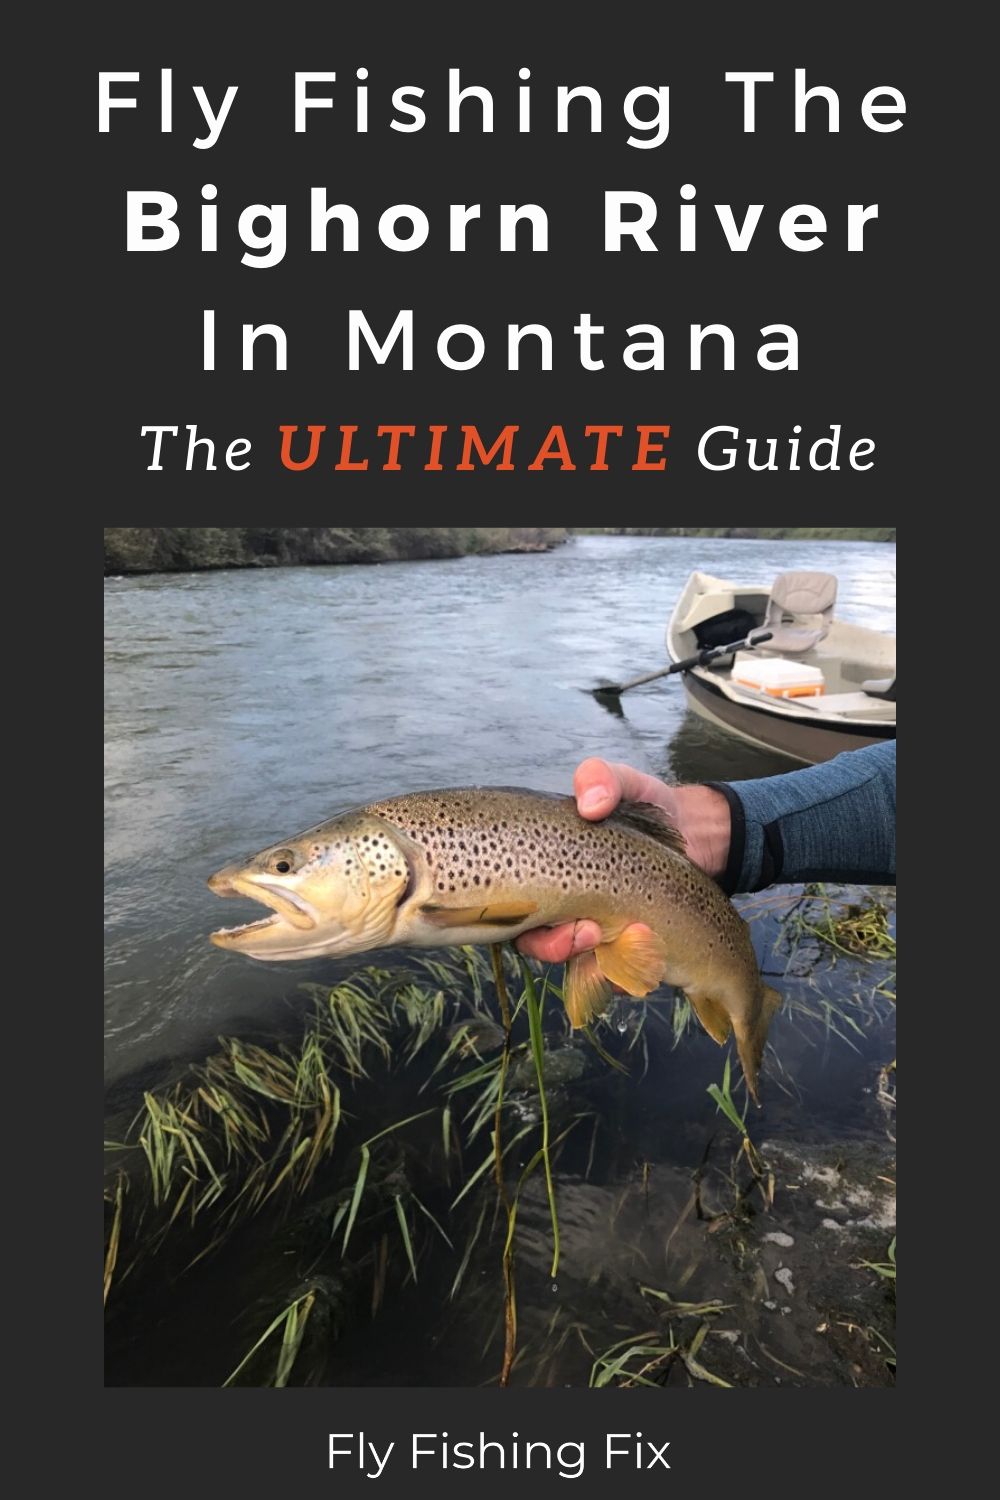 The Ultimate Guide To Fly Fishing The Bighorn River In Montana | Fly Fishing Fix